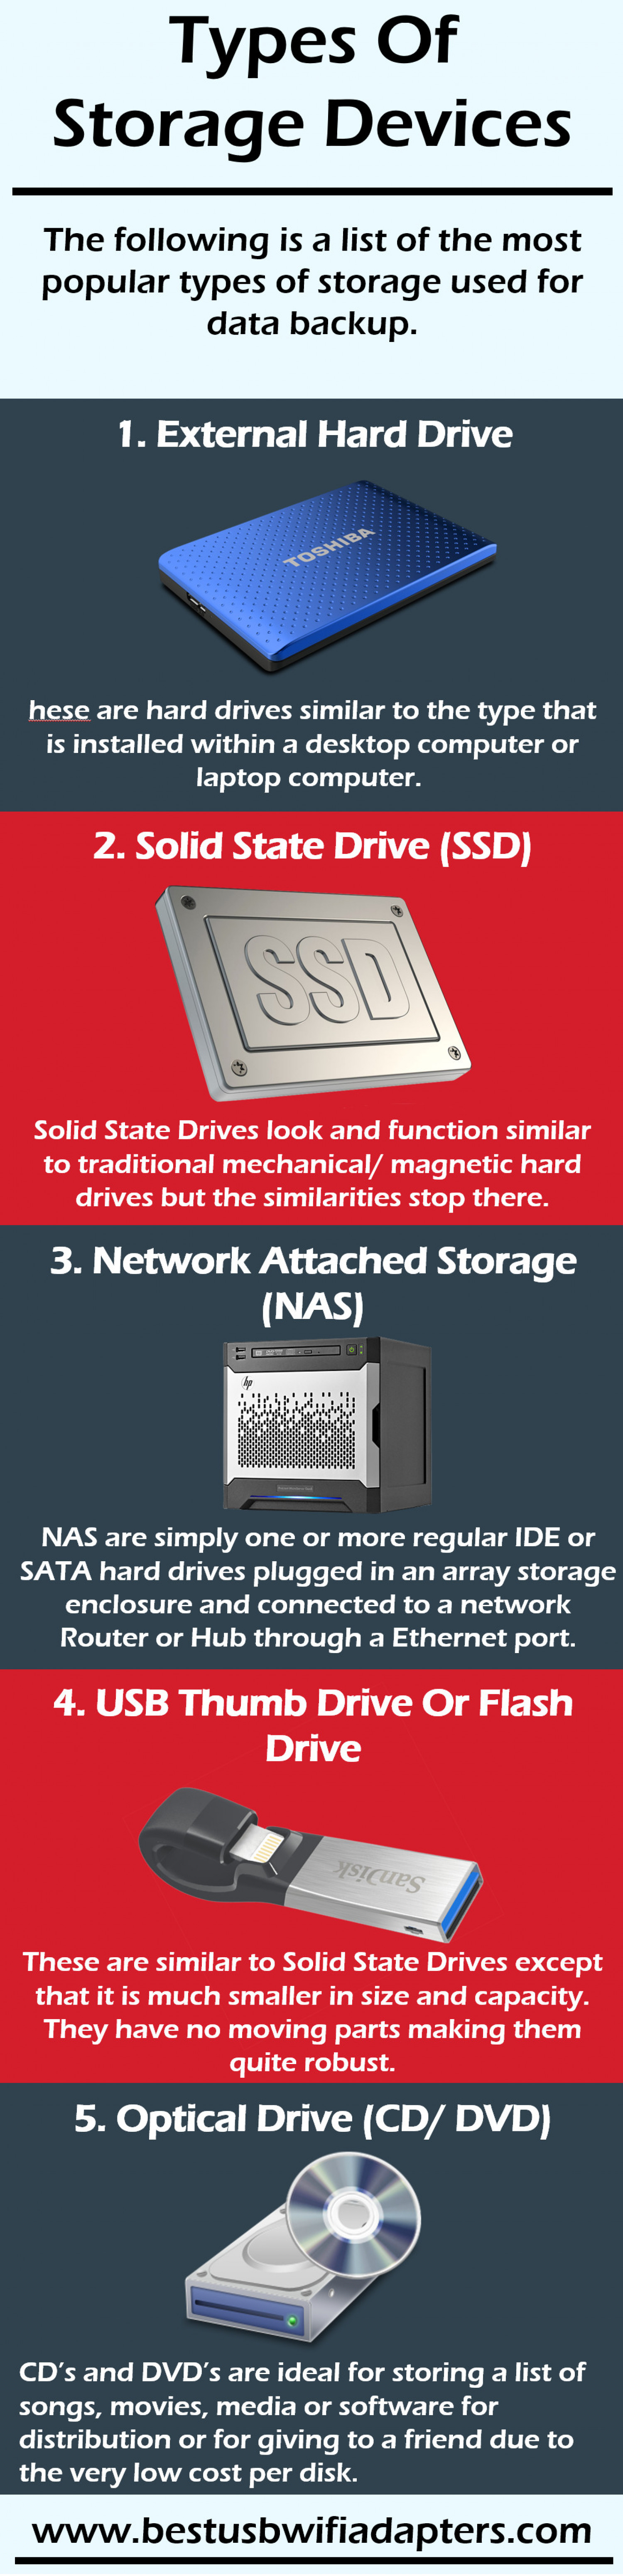 List of Different Storage Devices Infographic